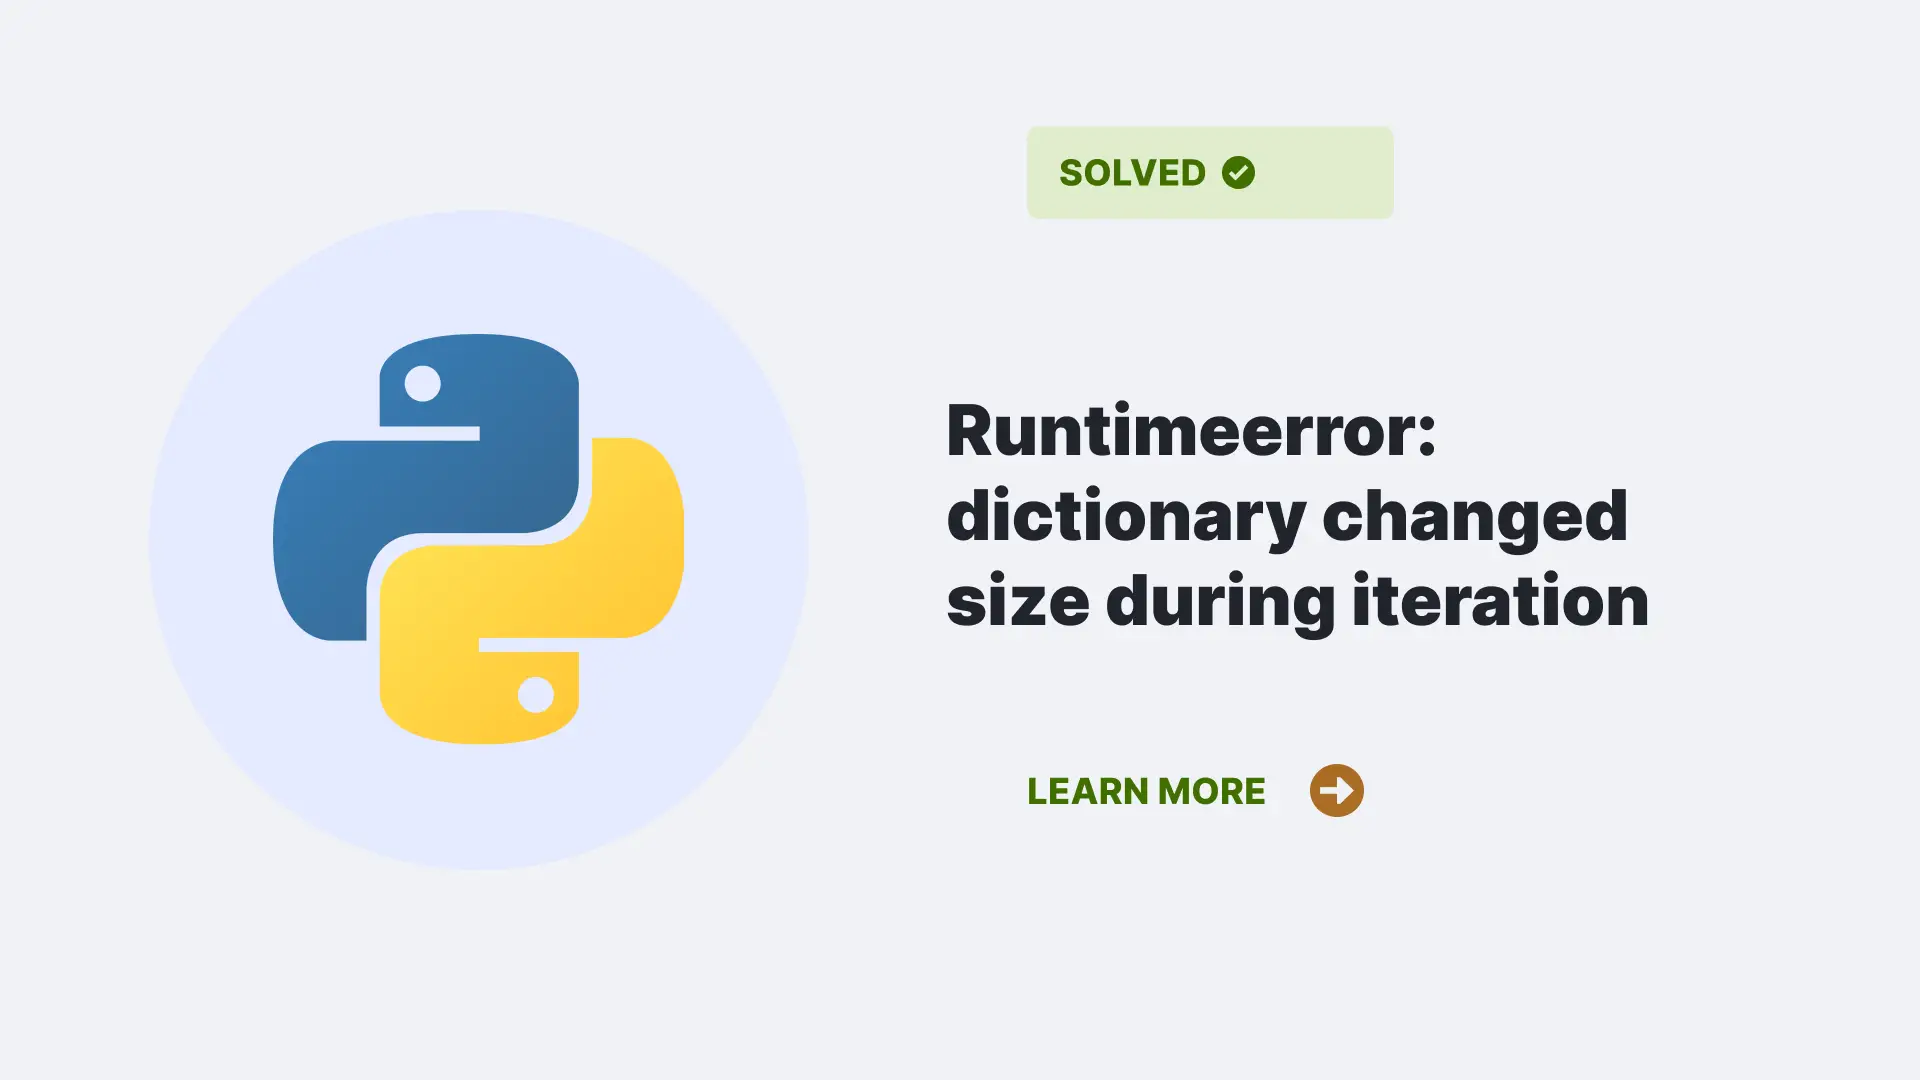 Runtimeerror: dictionary changed size during iteration